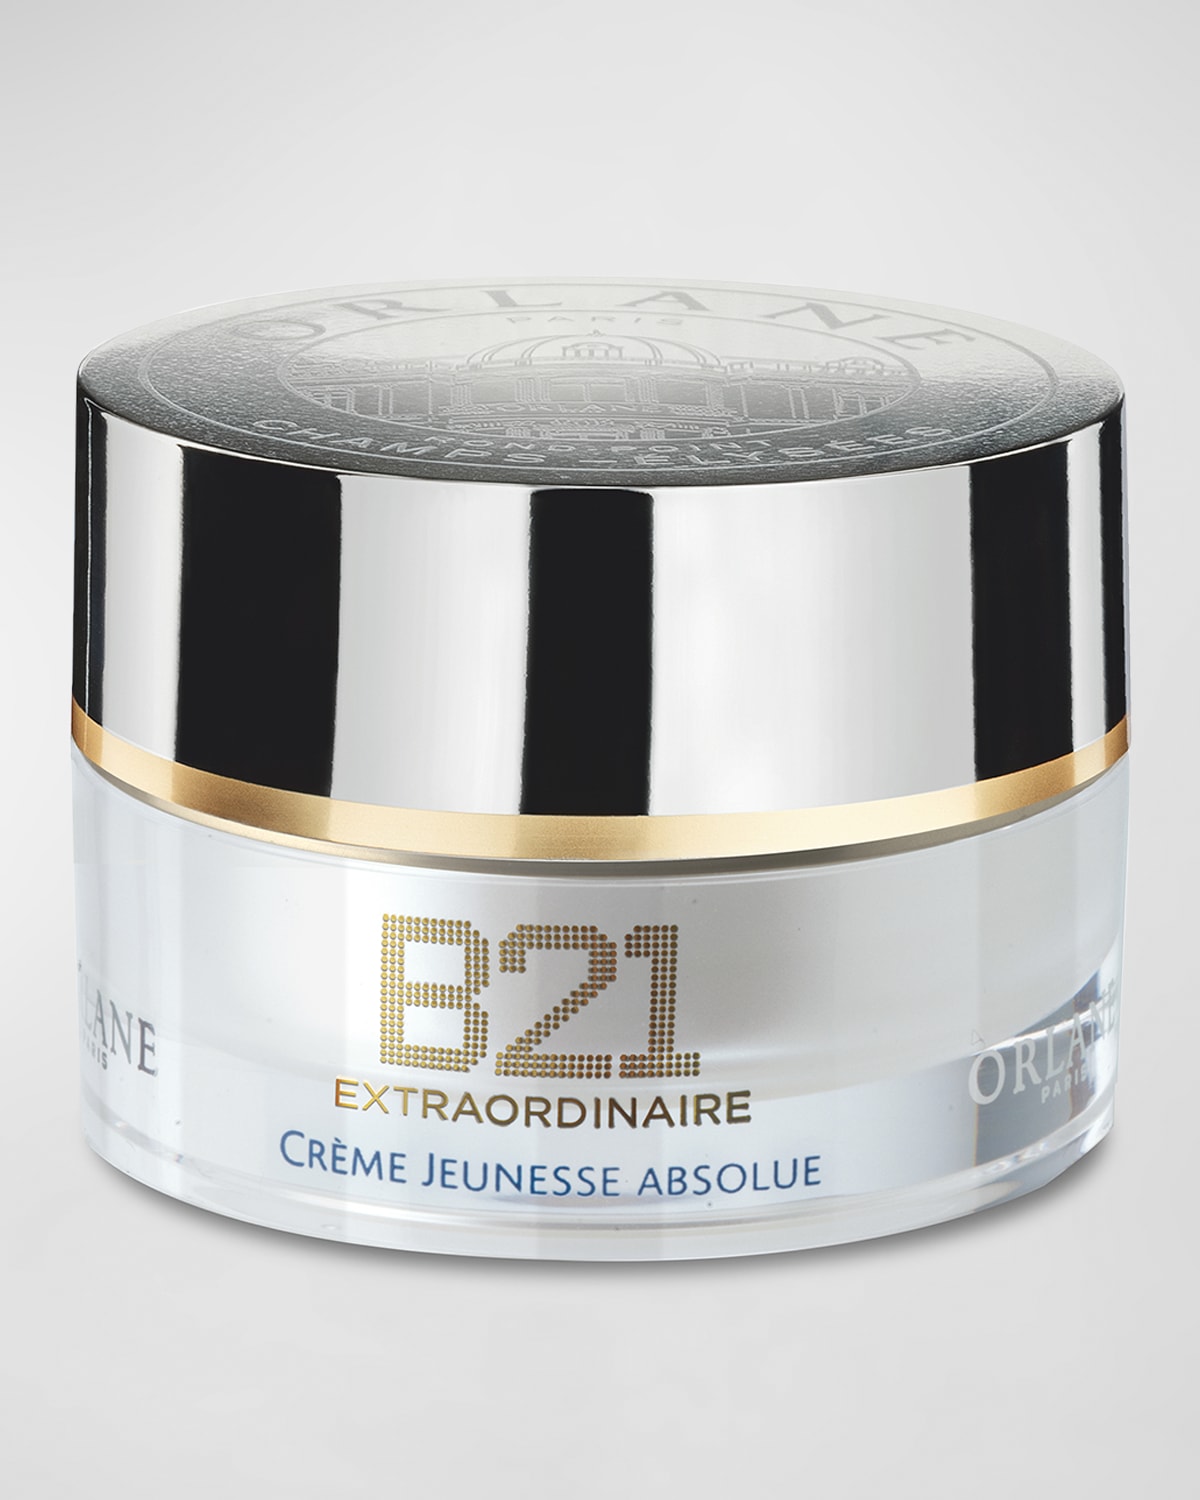 9 mL B21 Extraordinaire Creme Jeunesse Absolue, Yours with any $100 Orlane Purchase